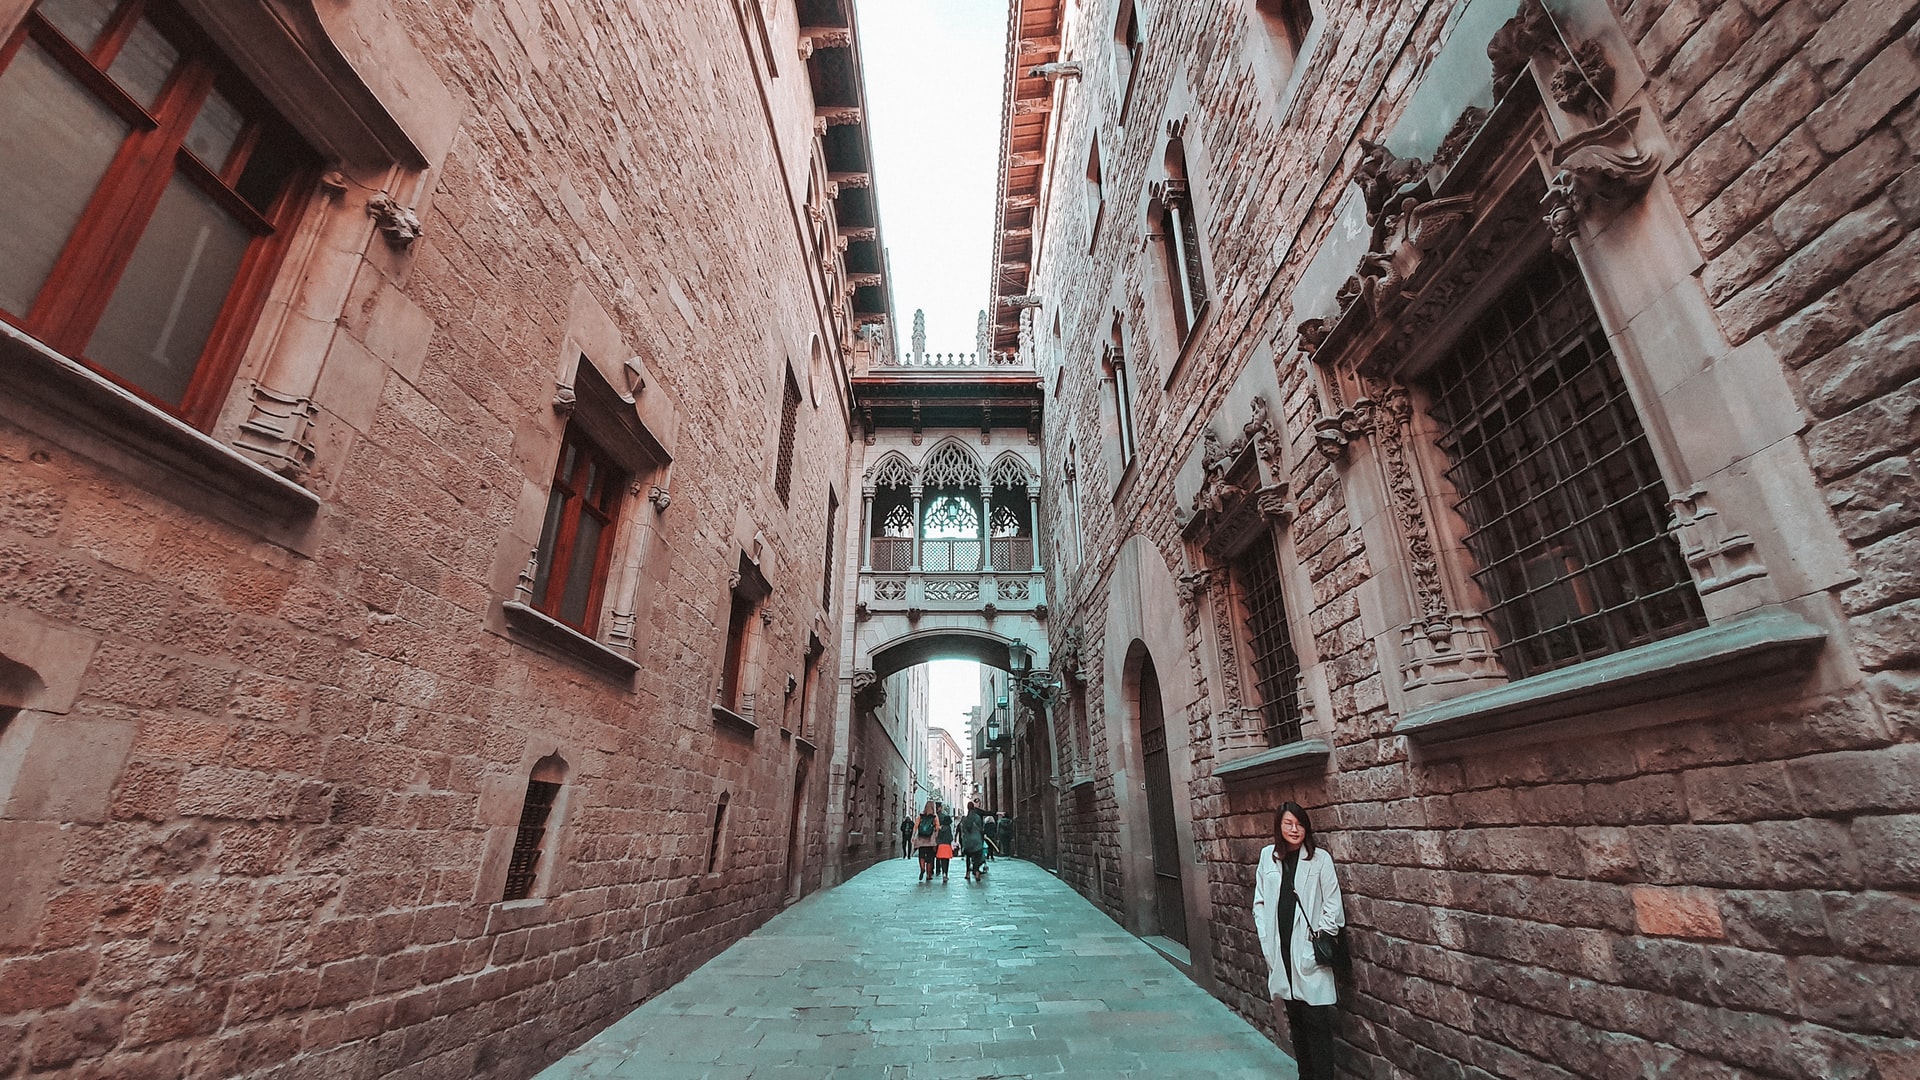 Famous for its medieval charm, Barcelona's Gothic Quarter is home to some of the Catalan capital's most impressive historic attractions